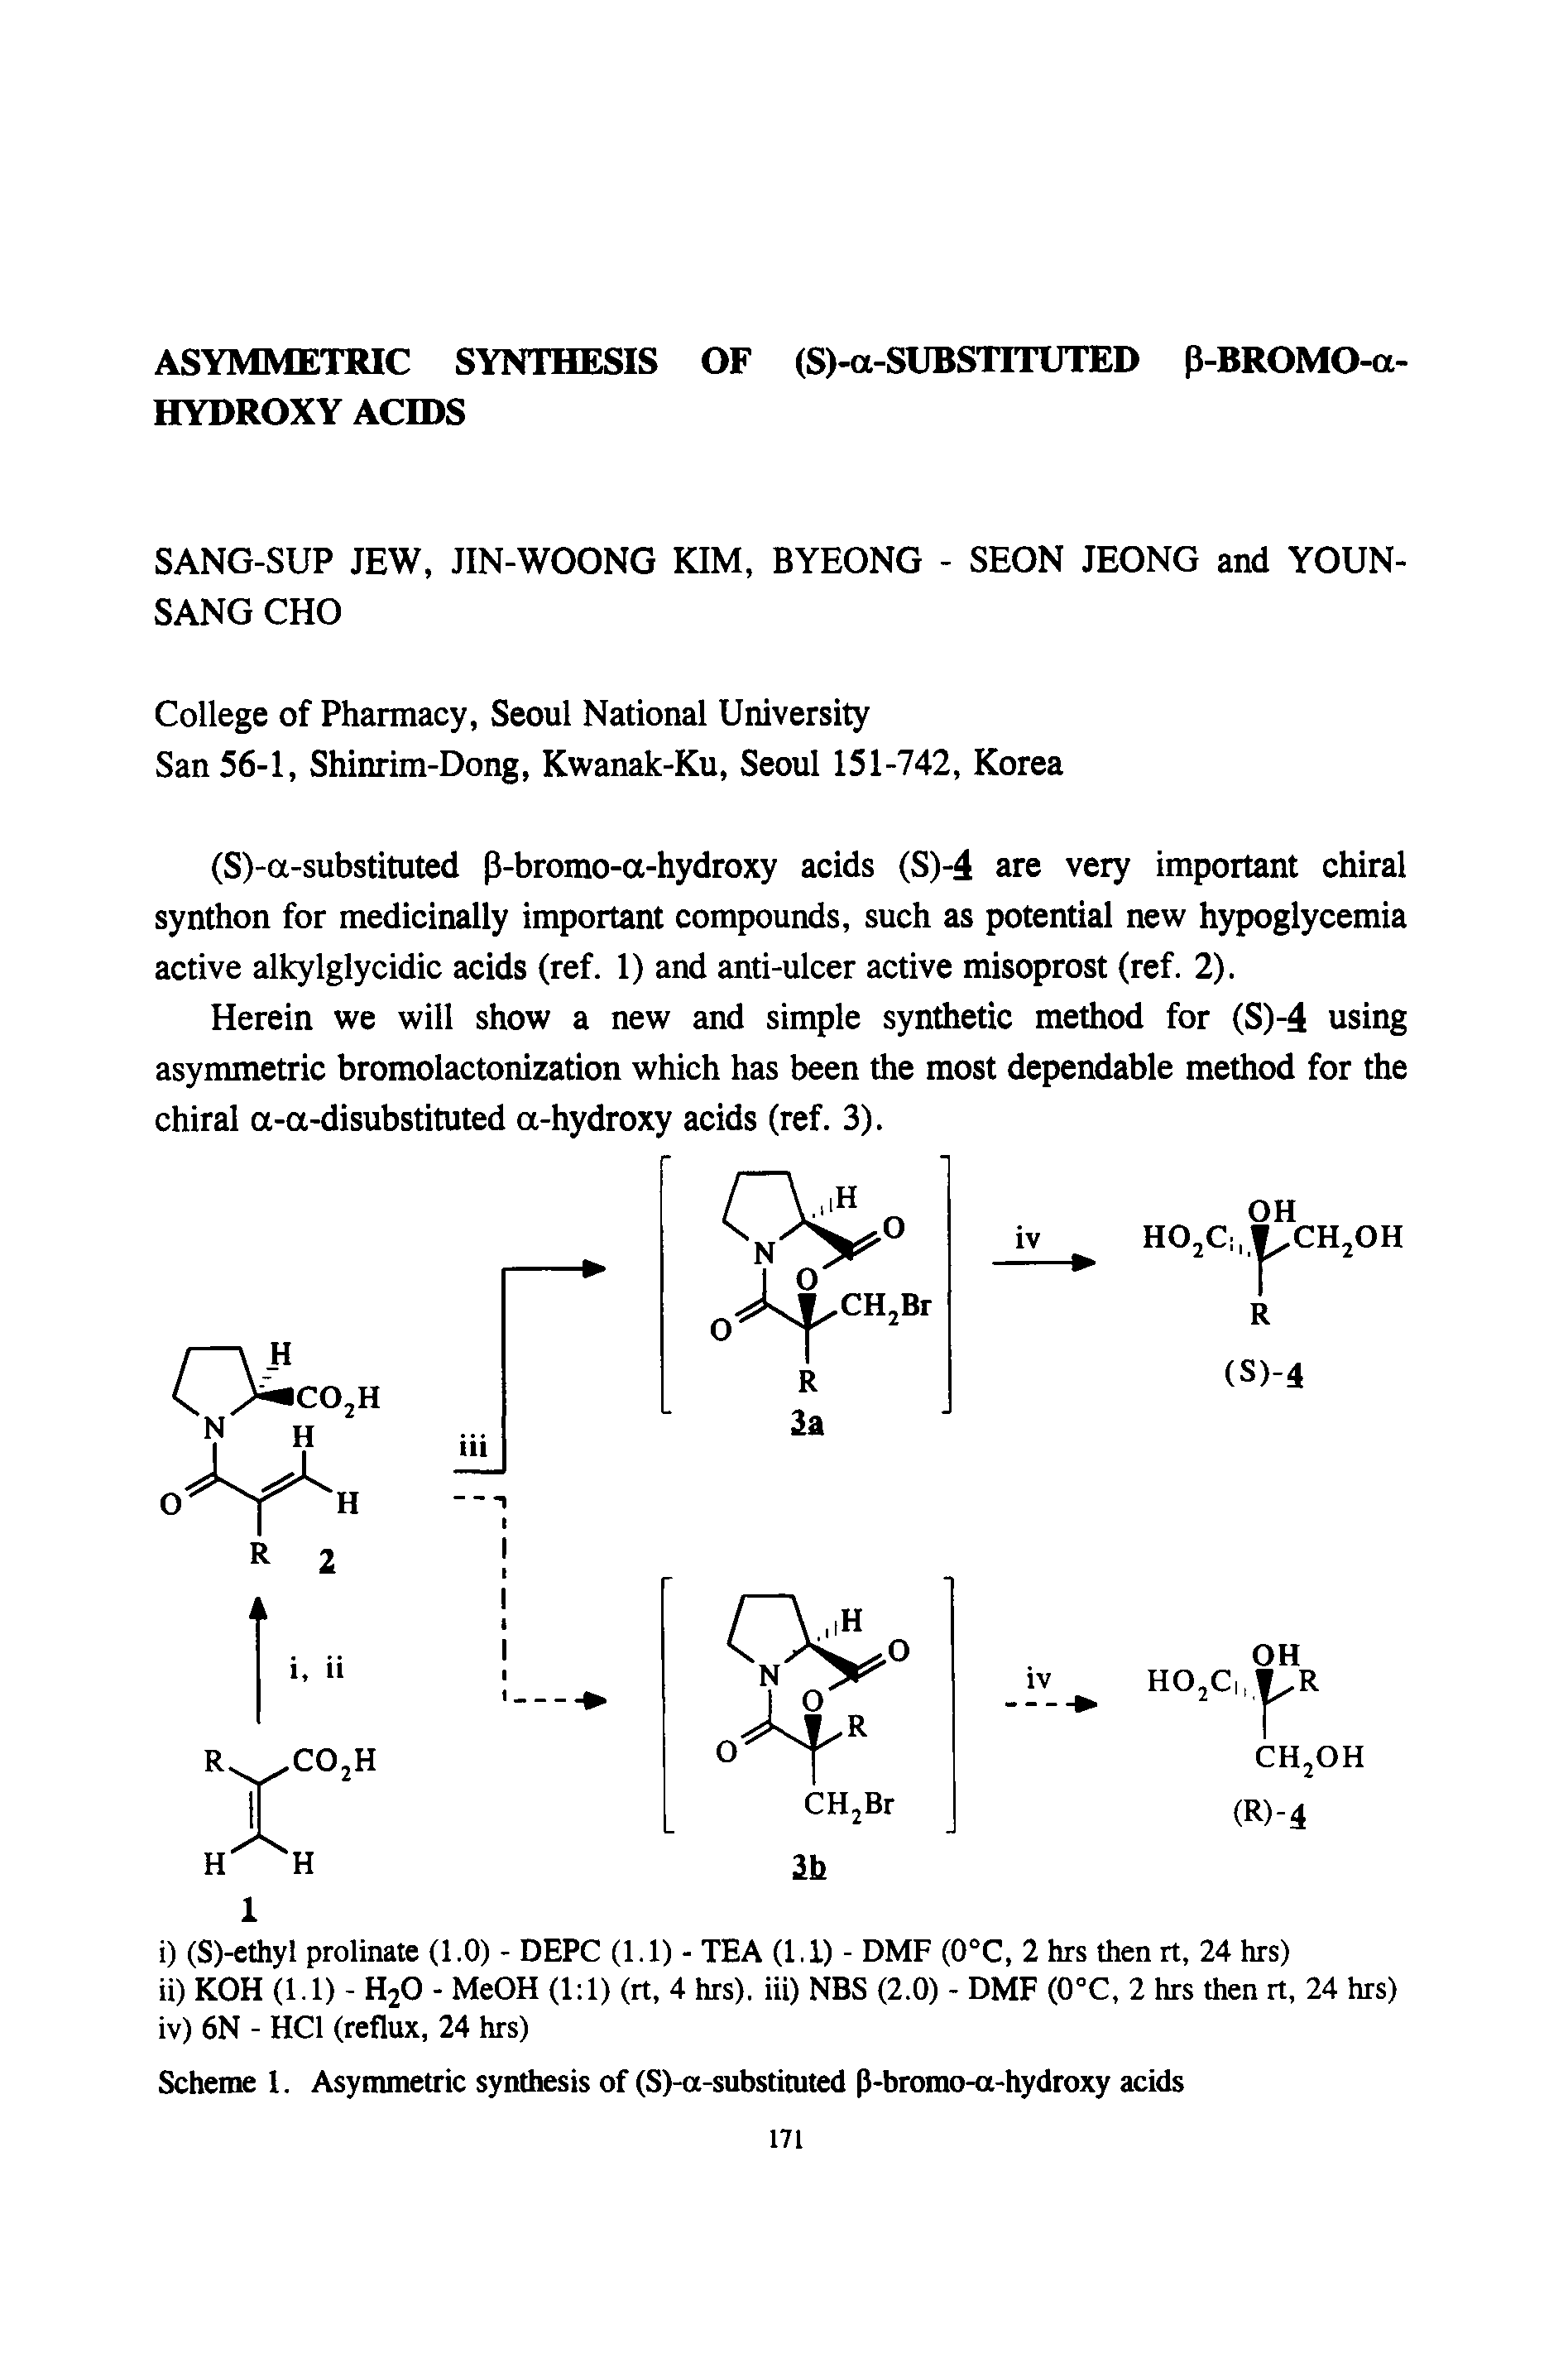 Scheme 1. Asymmetric synthesis of (S)-a-substimted P-bromo-a-hydroxy acids...